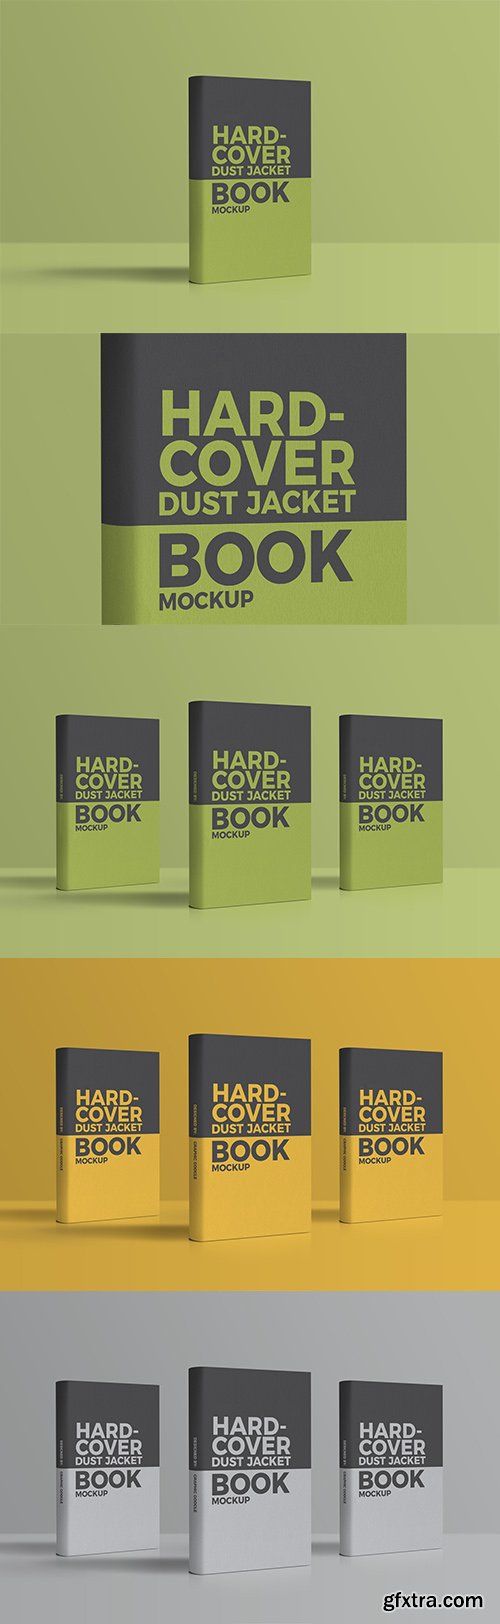 PSD Mock-Up - Hardcover Dust Jacket Book